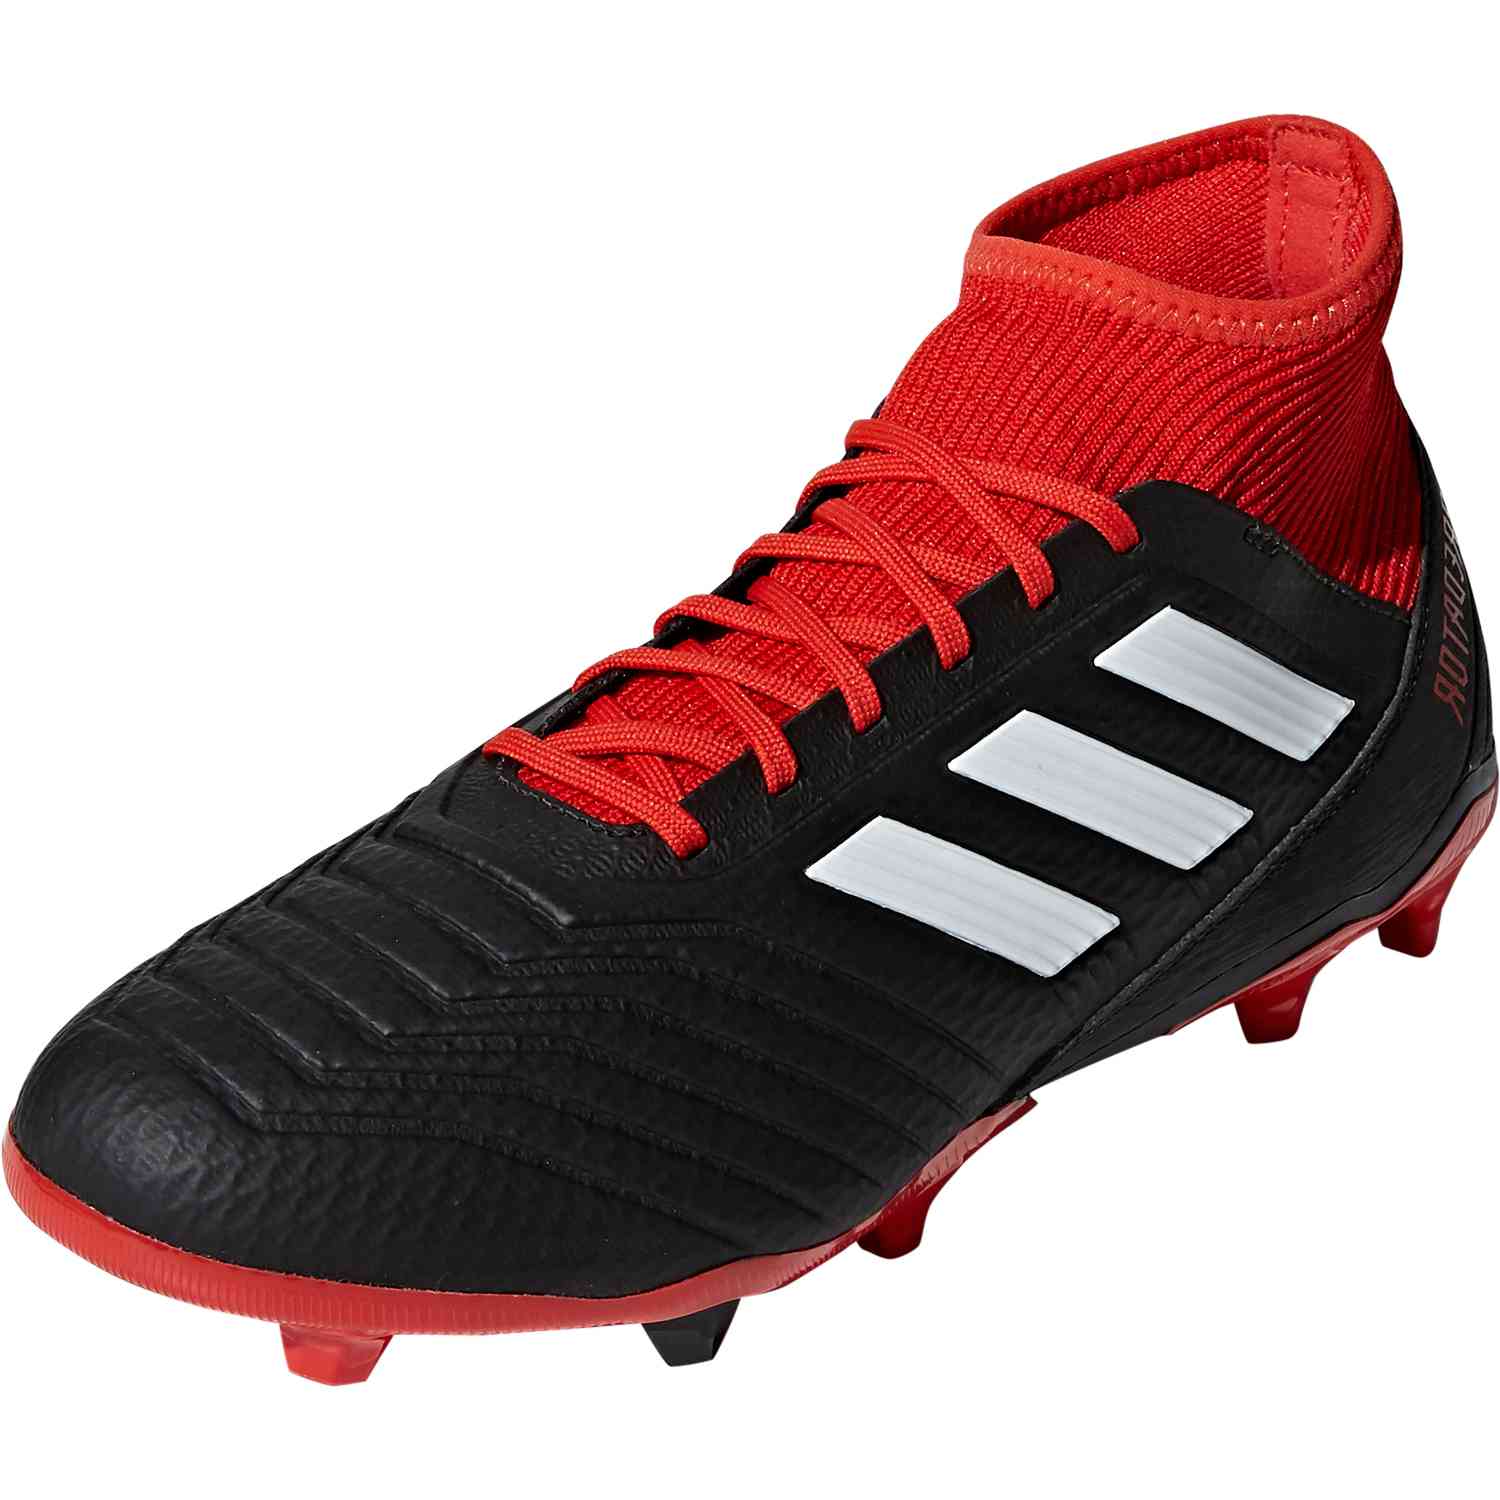 adidas 18.3 soccer cleats